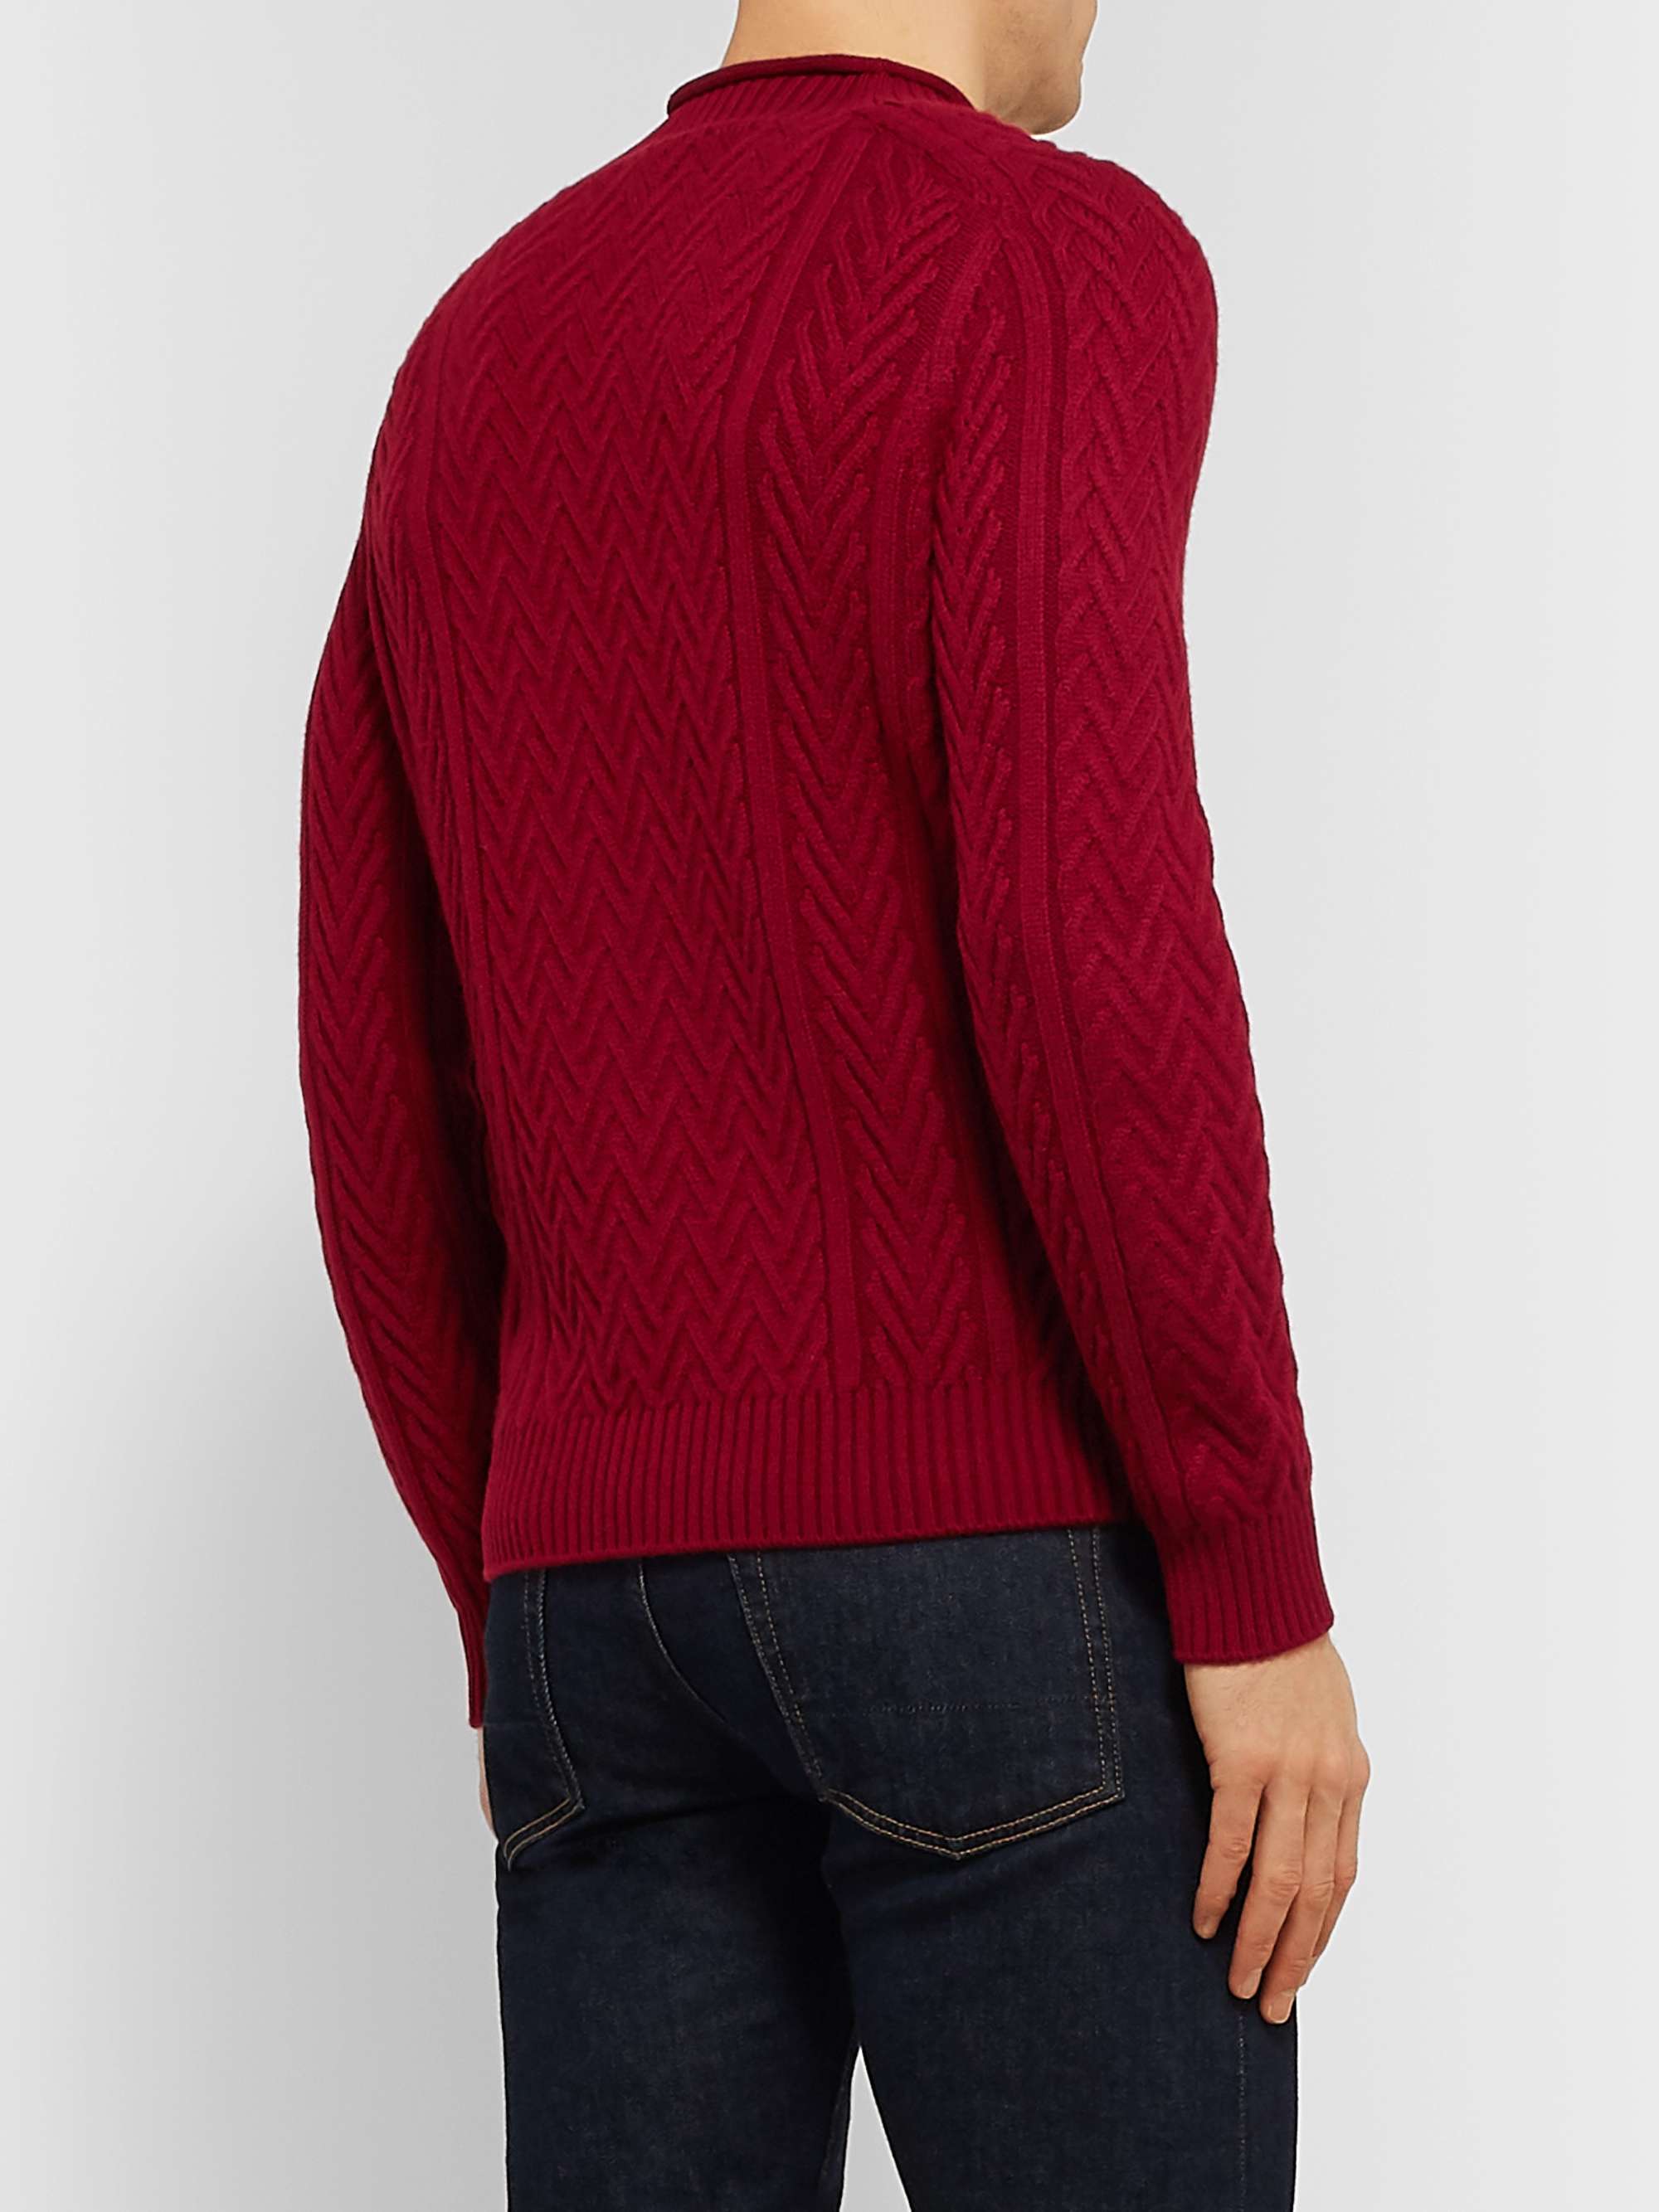 Red Slim-Fit Cable-Knit Baby Cashmere Mock-Neck Sweater | LORO PIANA ...